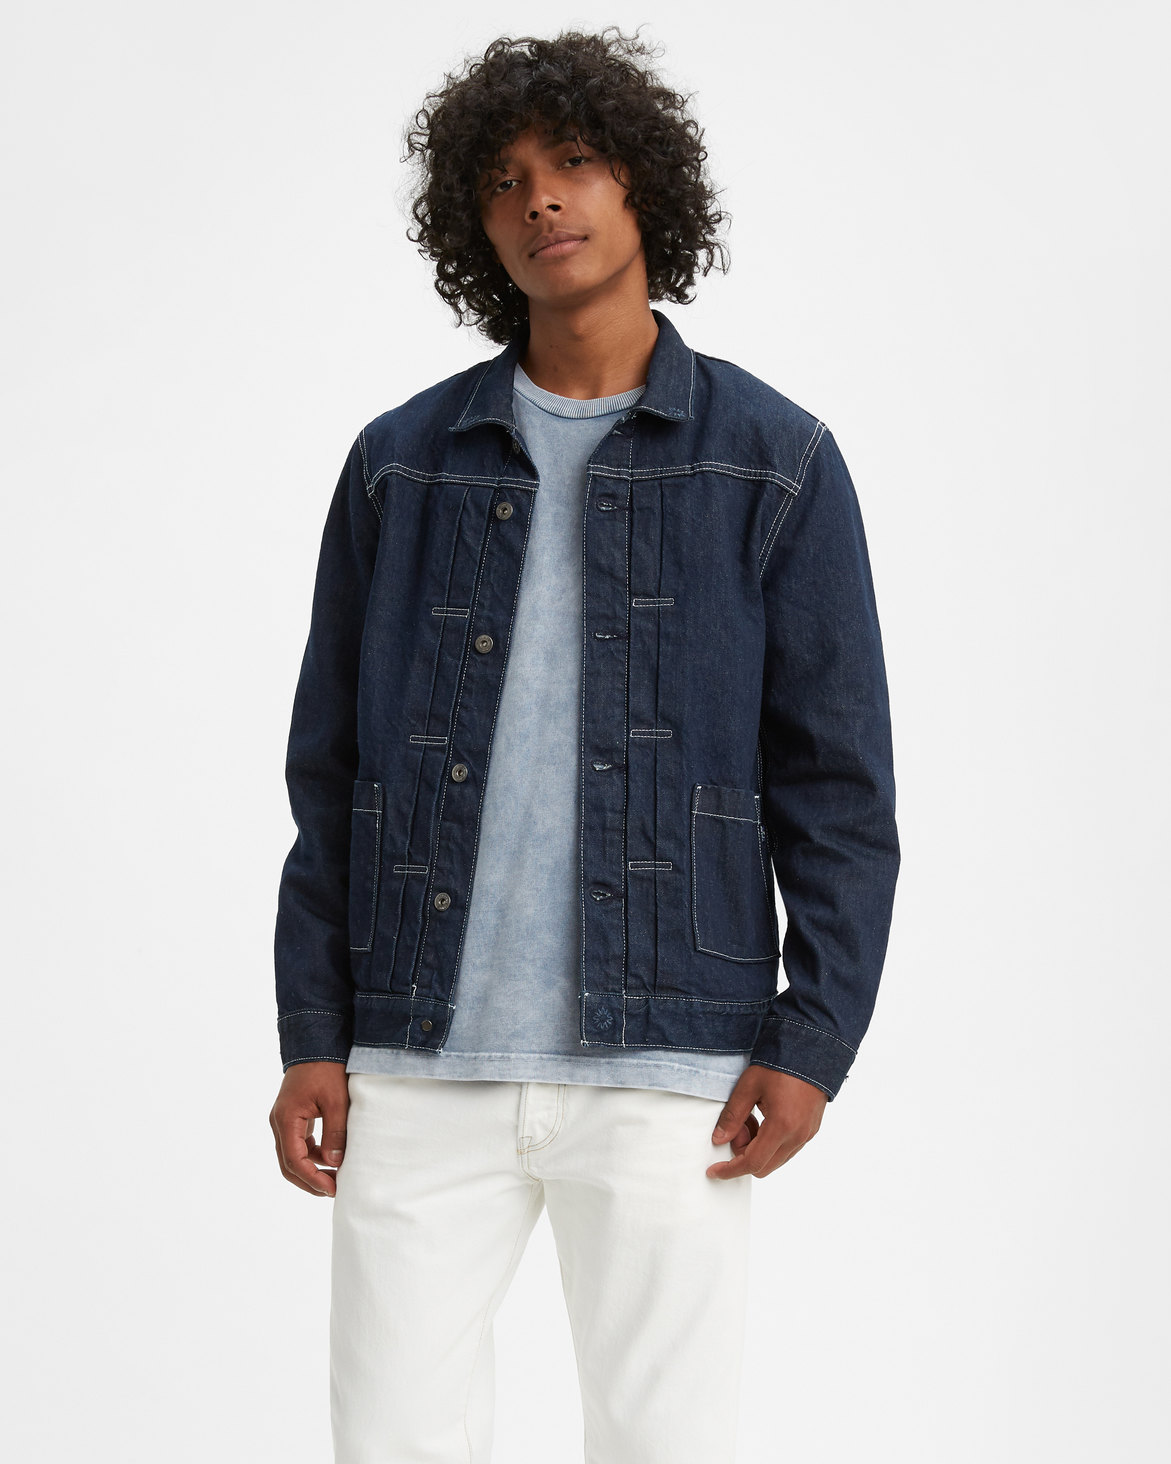 Levi's Made & Crafted Type II Worn Trucker | Levi